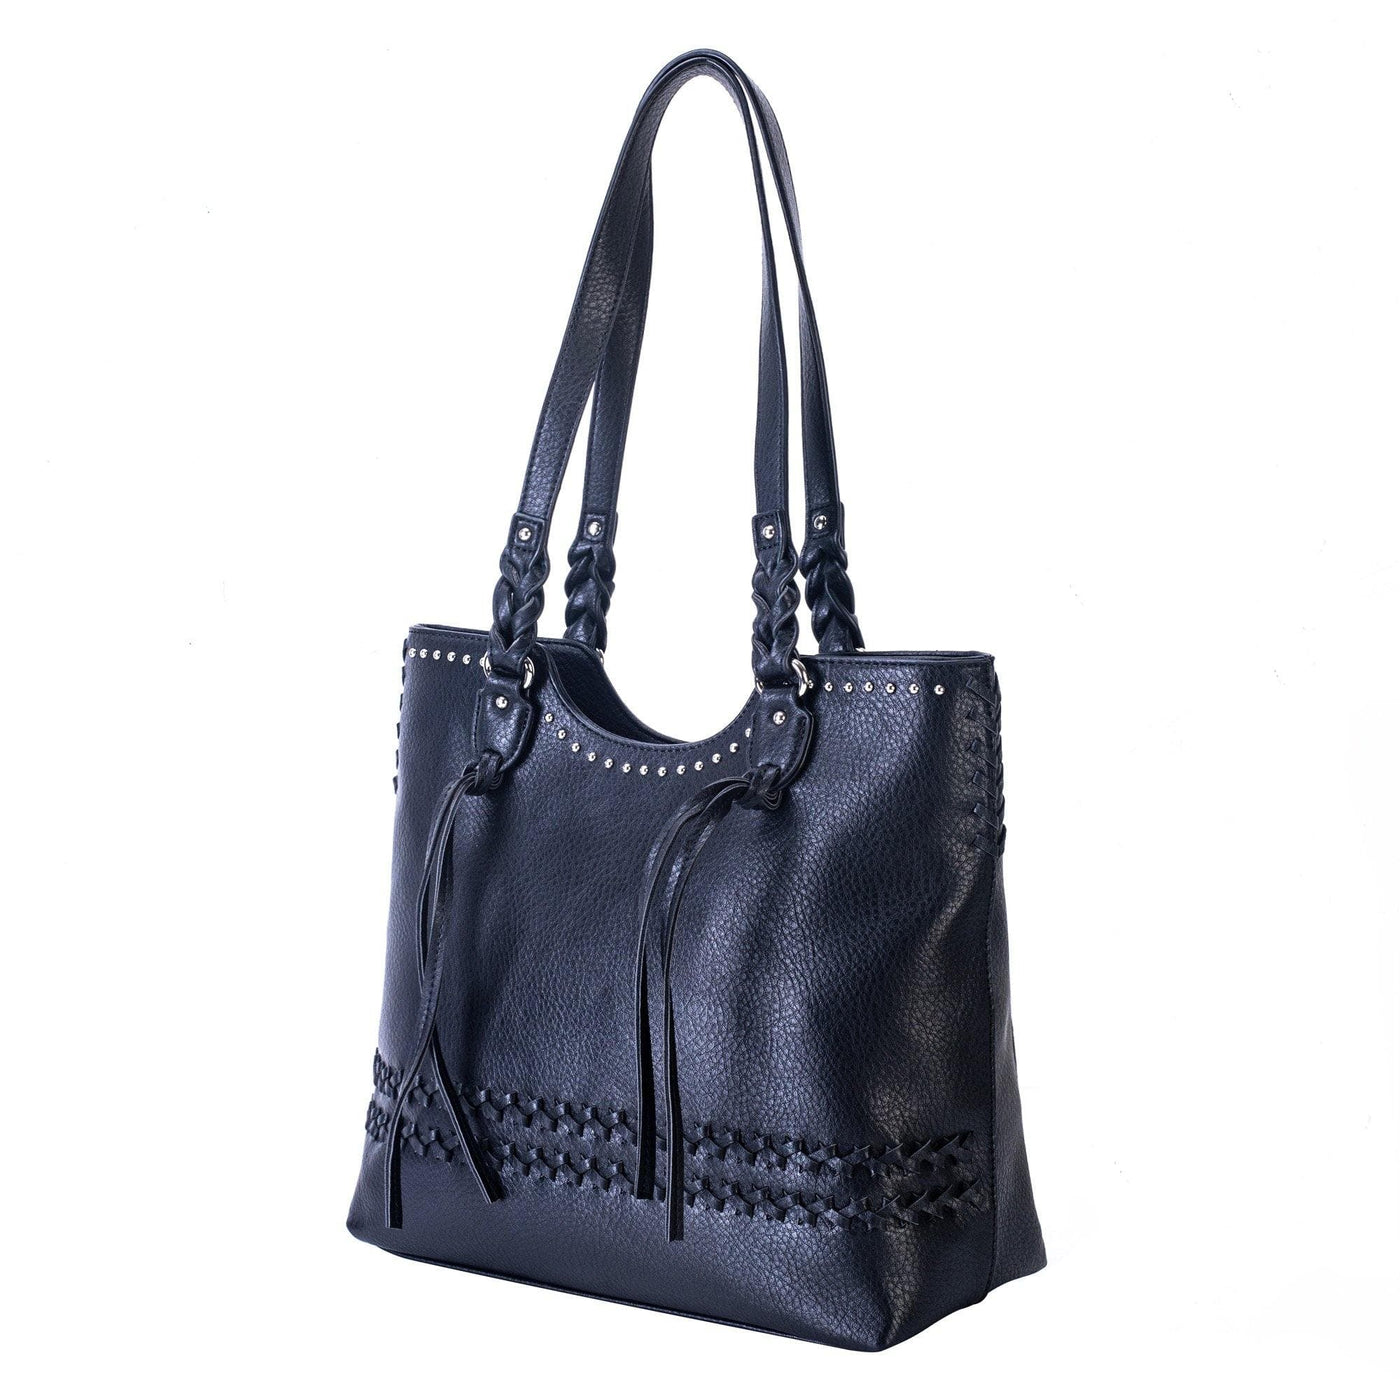  Concealed Carry Riley Tote -  Lady Conceal -  Concealed Carry Purse -  Designer Luxury Leather Carry Handbag -  carry Handbag for gun carry -  Unique Tote gun Handbag -  designer backpack purse -  designer purse sale -  designer purse sales -  womens designer purse sale -  Riley Leather Tote -  designer lady purse concealed carry gun Handbag -   concealed carry Handbag for woman-  Easy Conceal Carry and Draw Purse